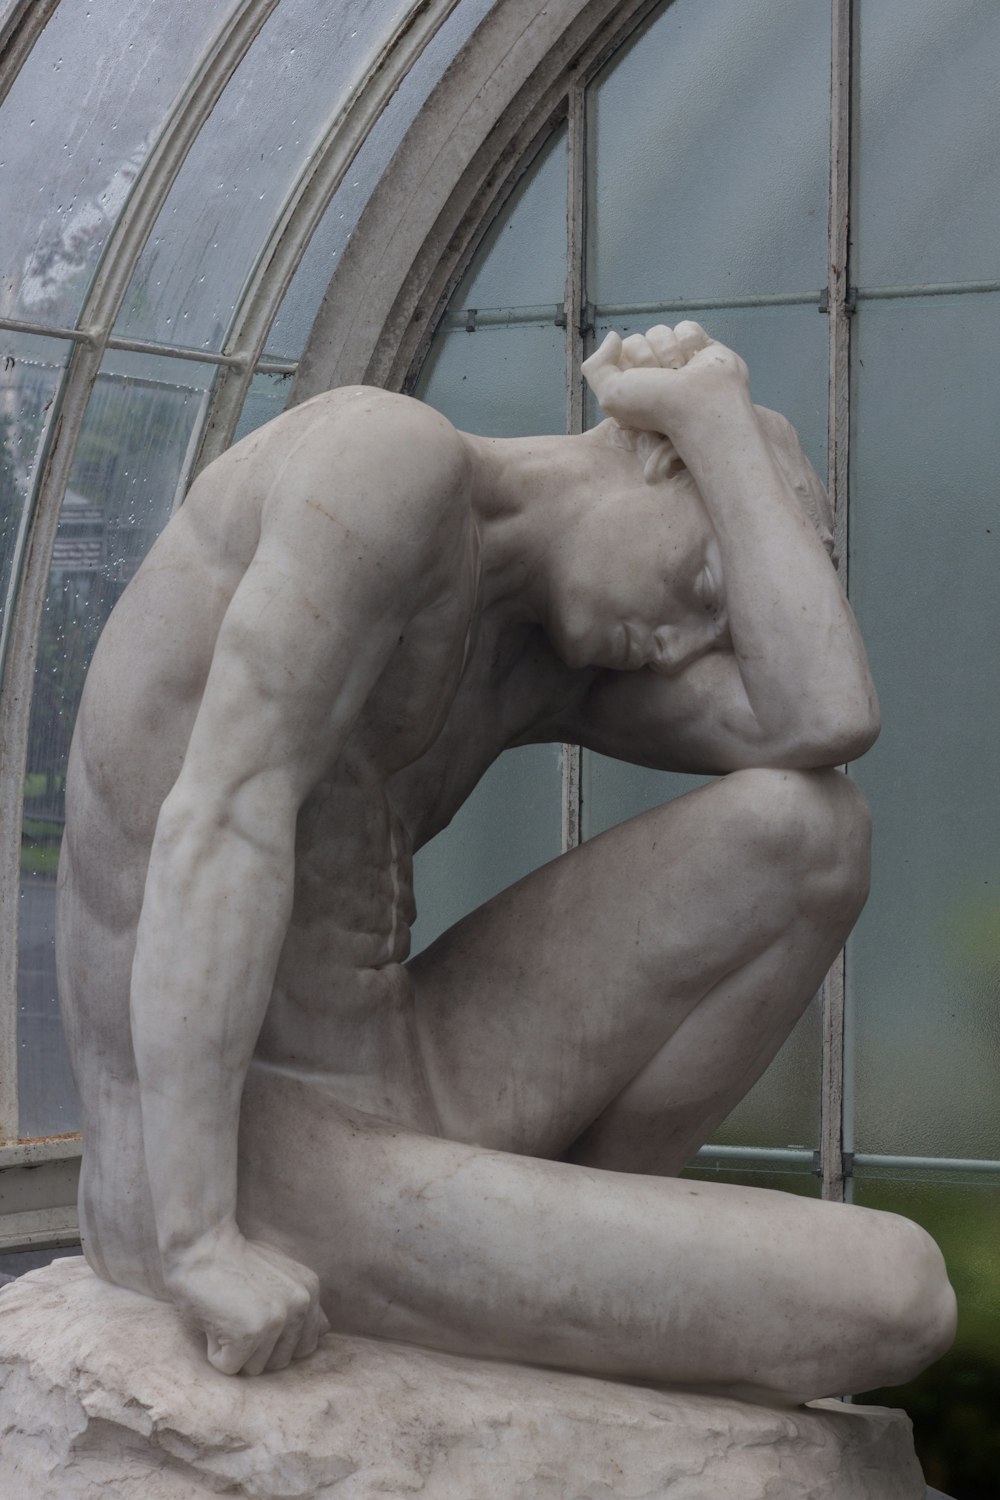 a statue of a man sitting in front of a window